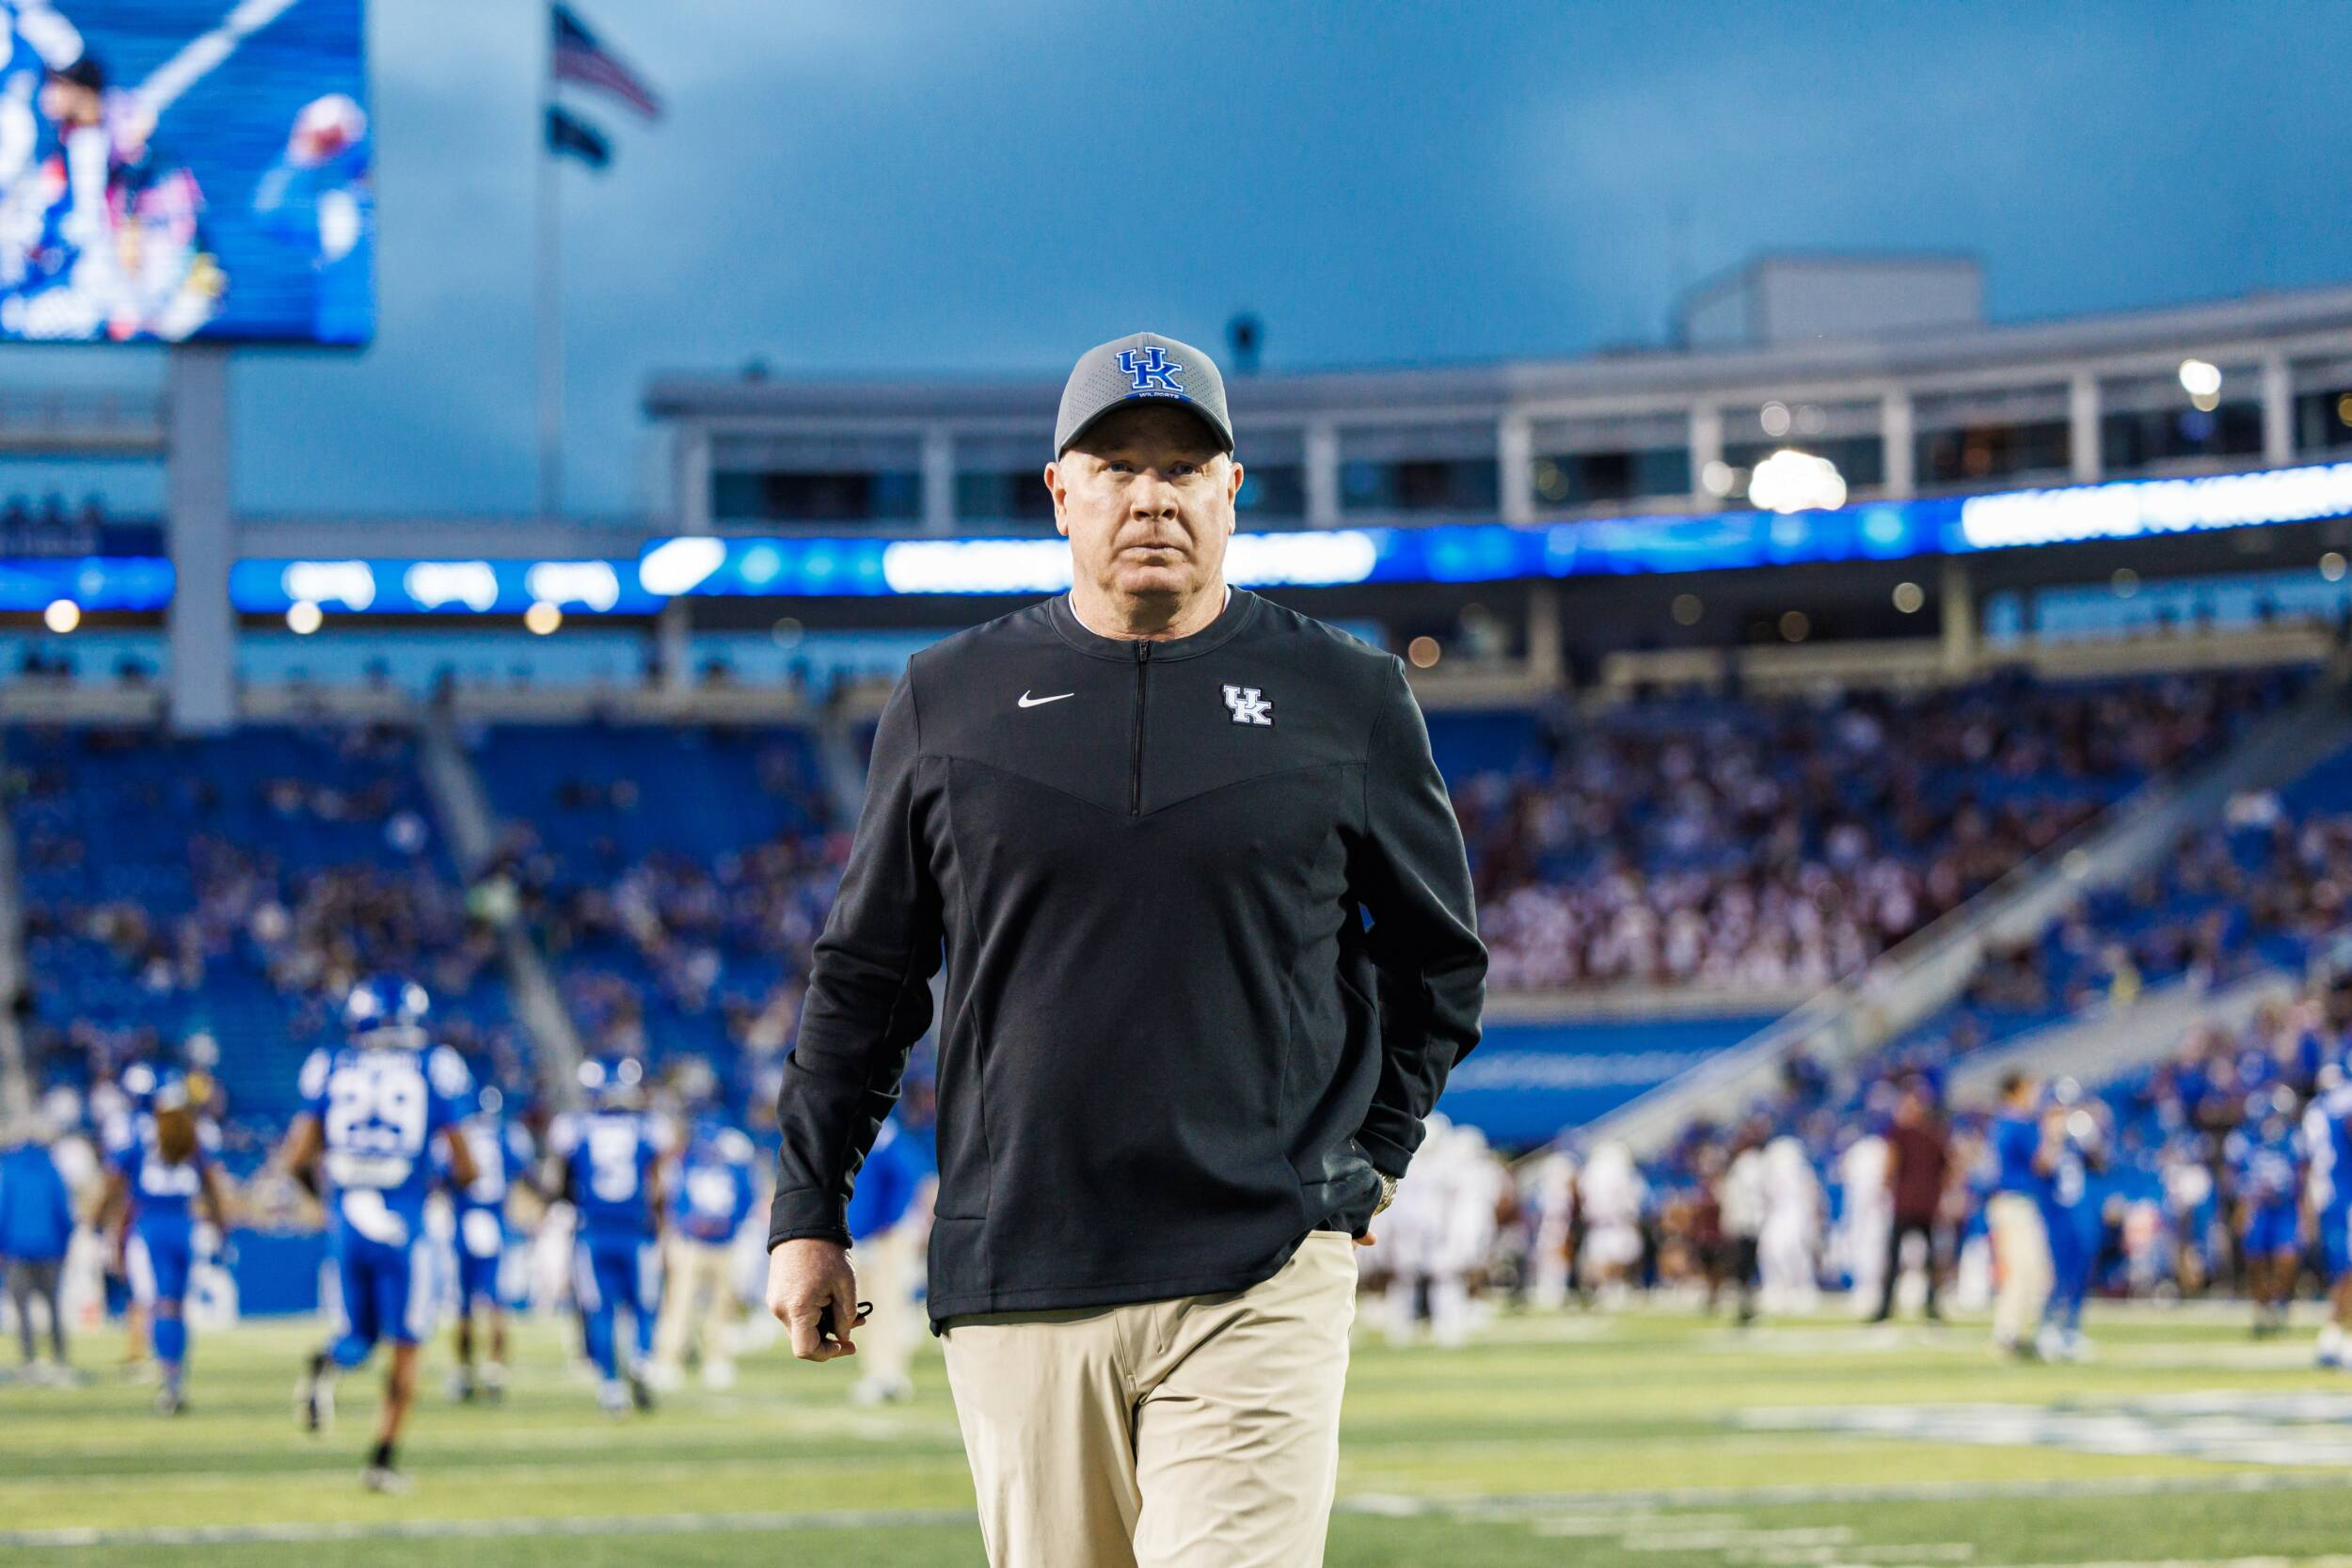 Stoops on Paul “Bear” Bryant Coach of the Year Award Watch List